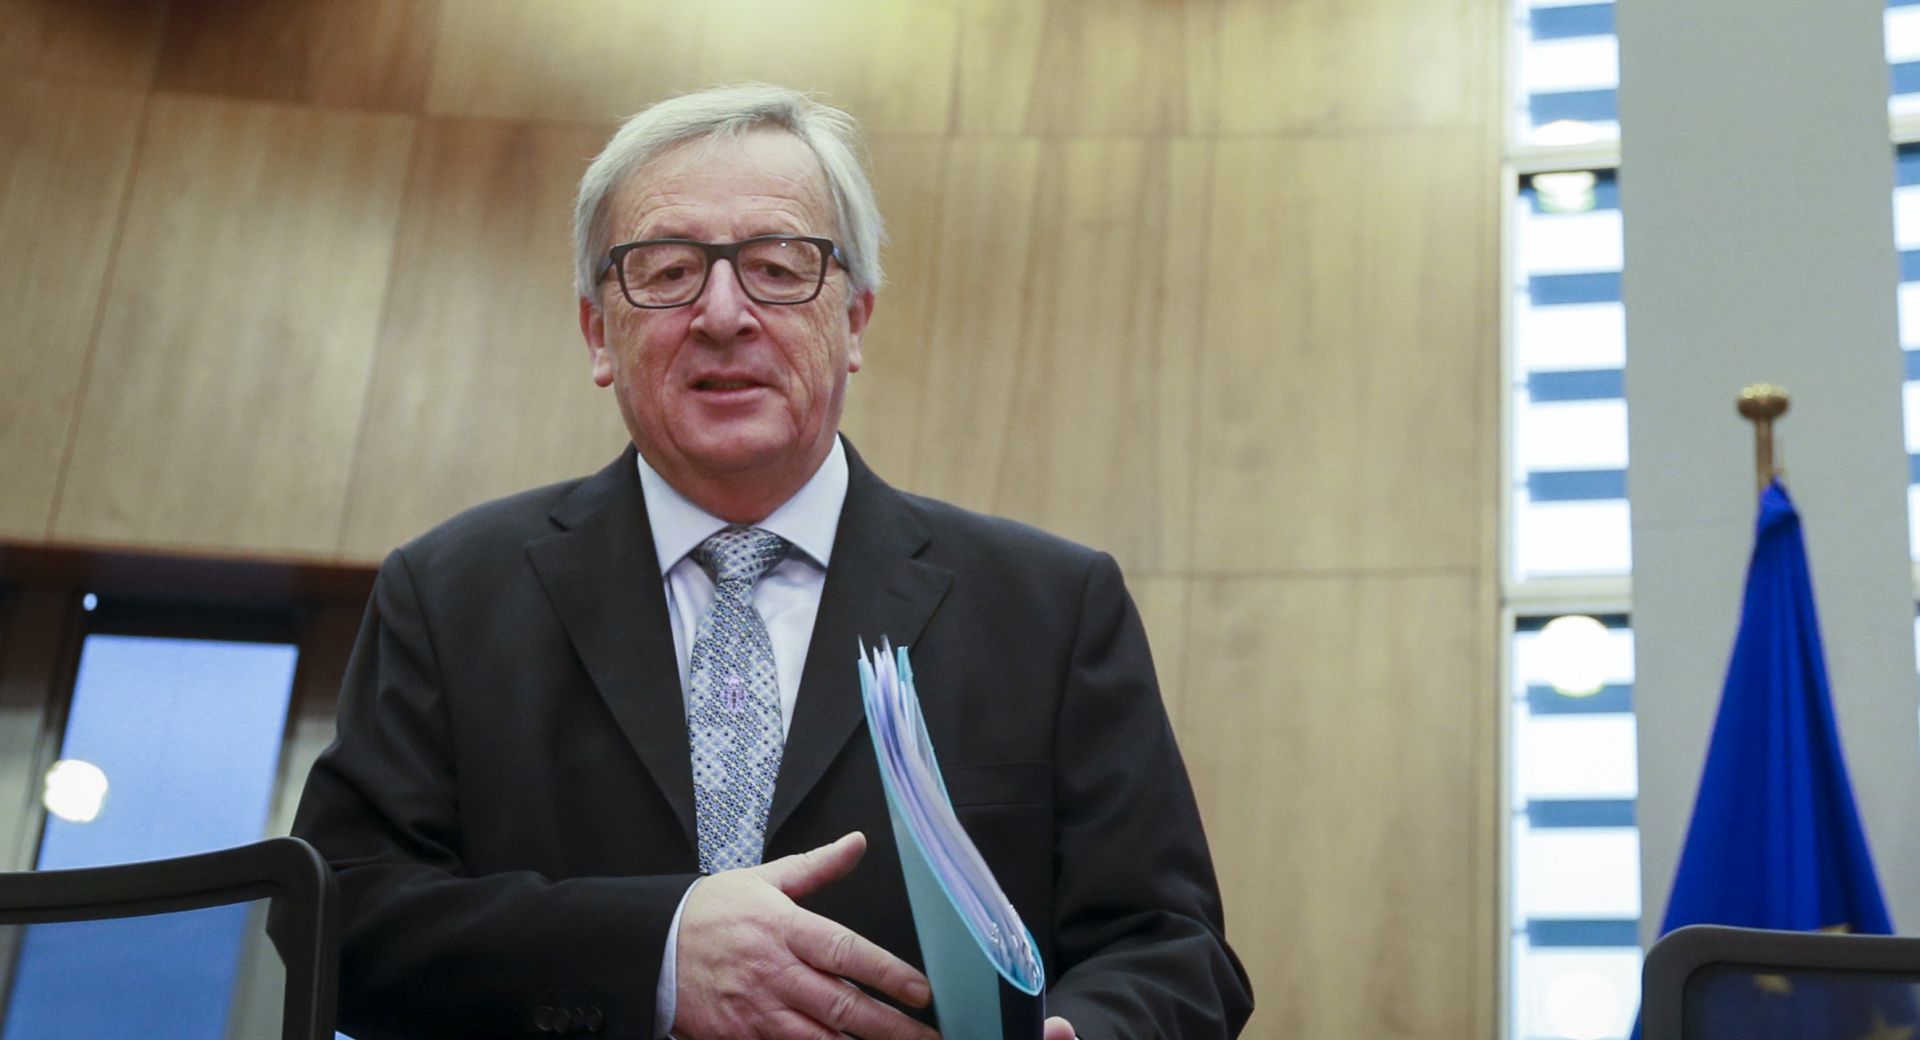 epa05777578 EU Commission President Jean-Claude Juncker arrives for the start of a weekly college meeting of the European Commission in Brussels, Belgium, 08 February 2017. The Commission is holding talks on Britain's financial obligations on leaving the EU.  EPA/OLIVIER HOSLET